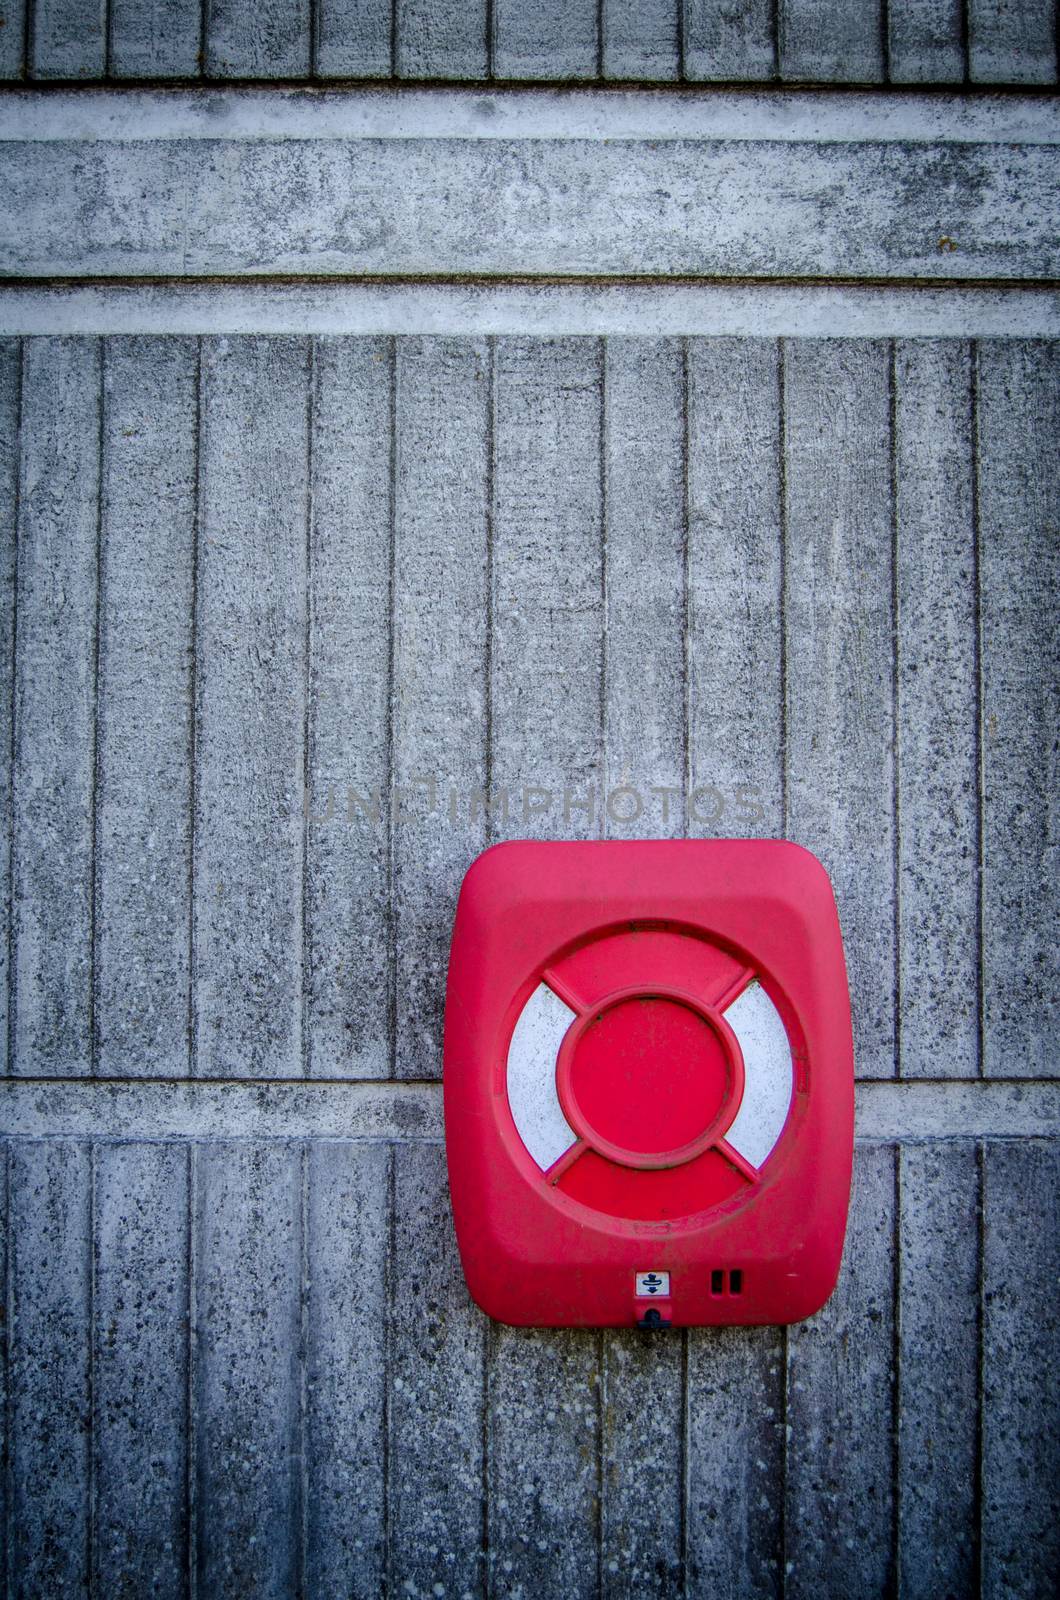 Red Life Preserver Against Concrete Wall